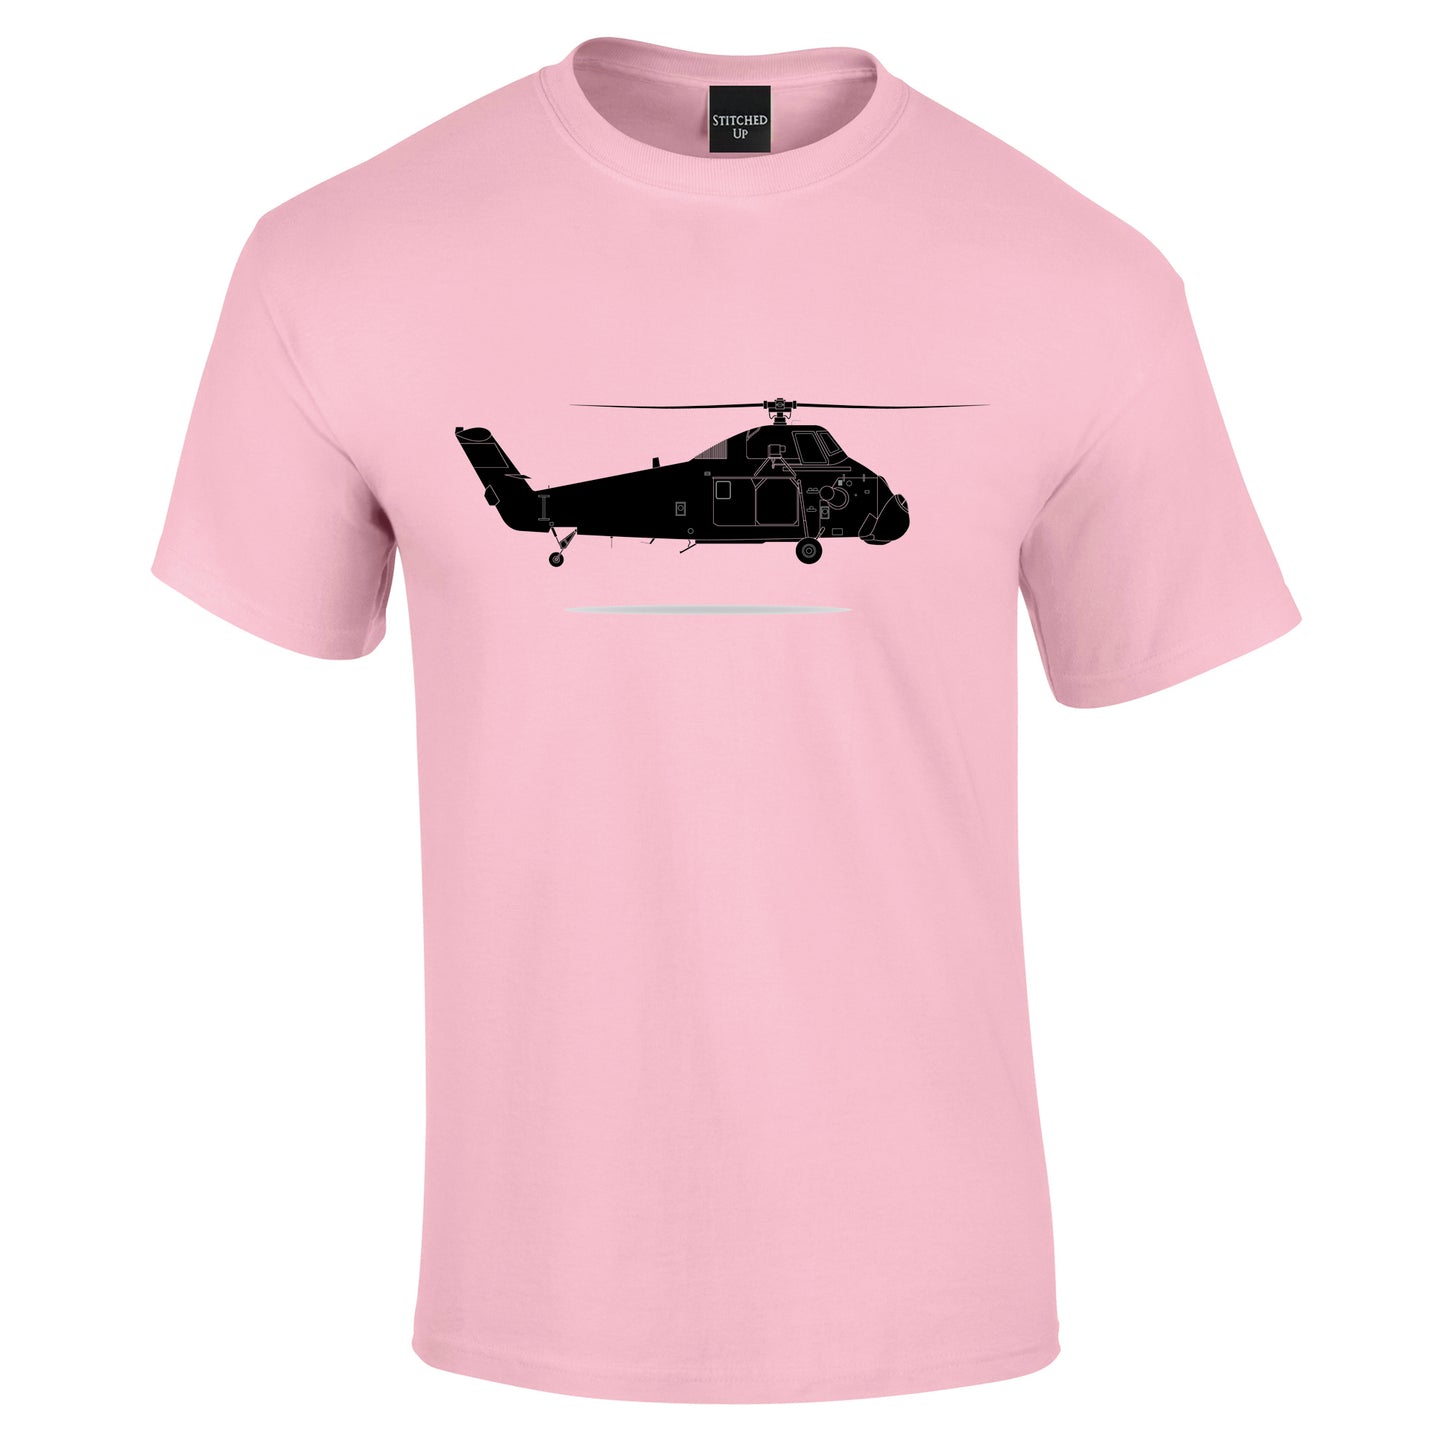 Wessex Rescue Helicopter T-Shirt